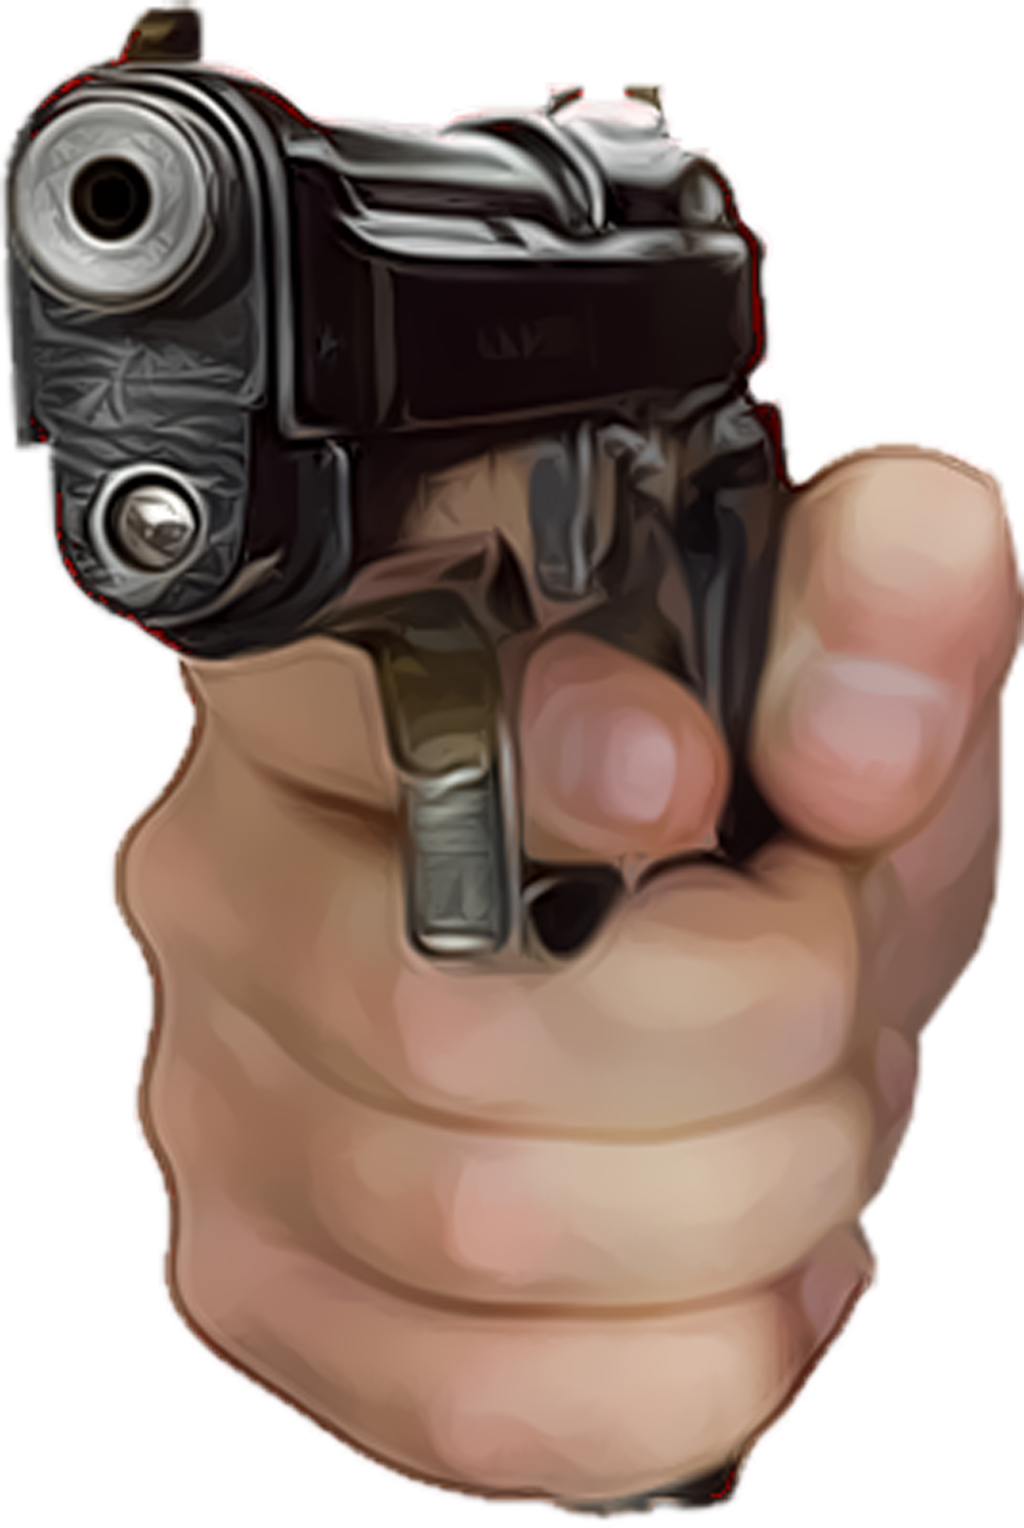 Pistol clipart holding, Pistol holding Transparent FREE for download on